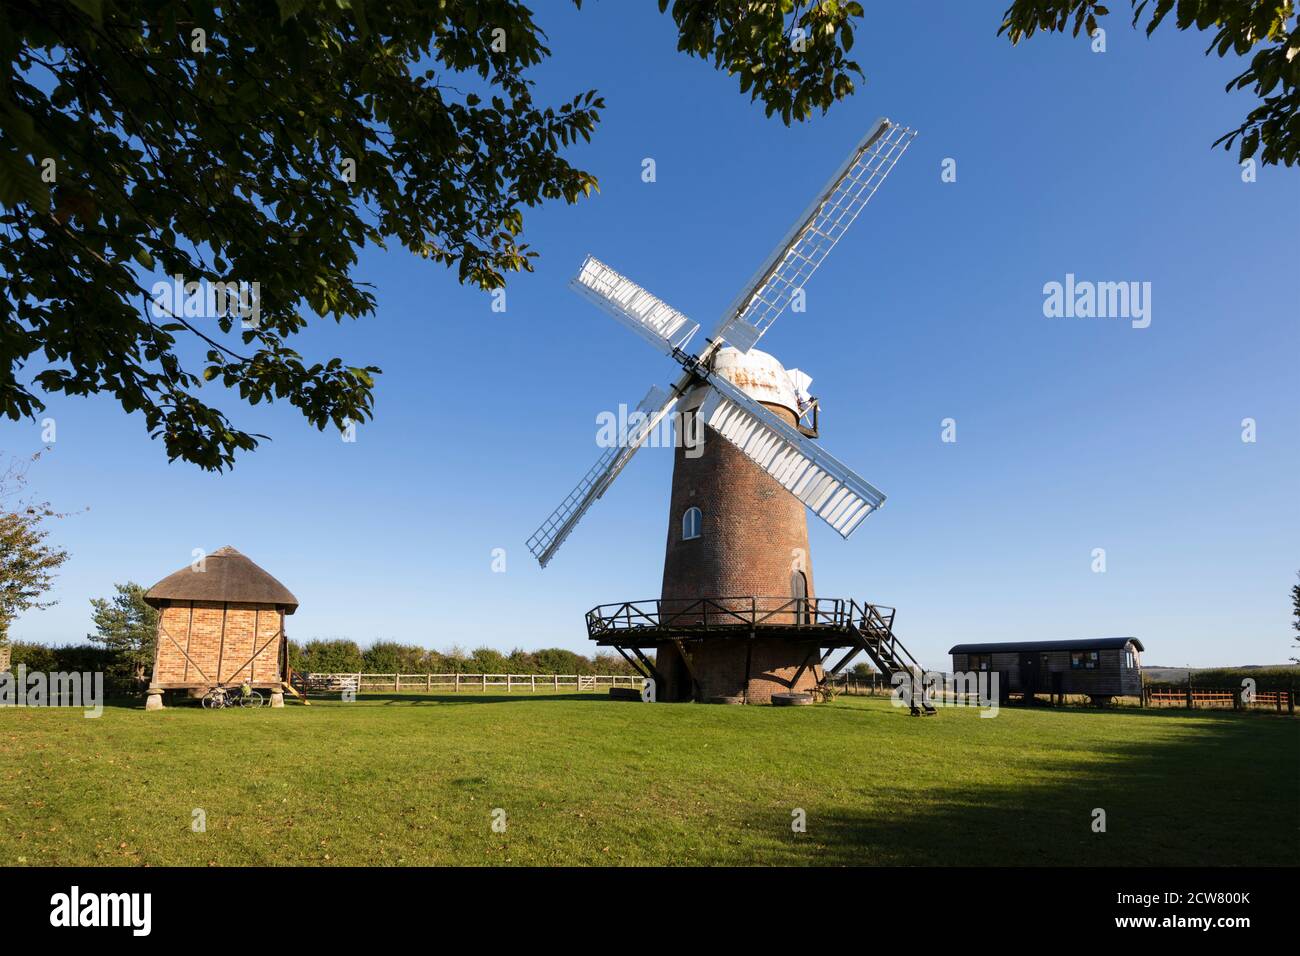 Wilton Windmill, Wilton, Wiltshire, Angleterre, Royaume-Uni, Europe Banque D'Images